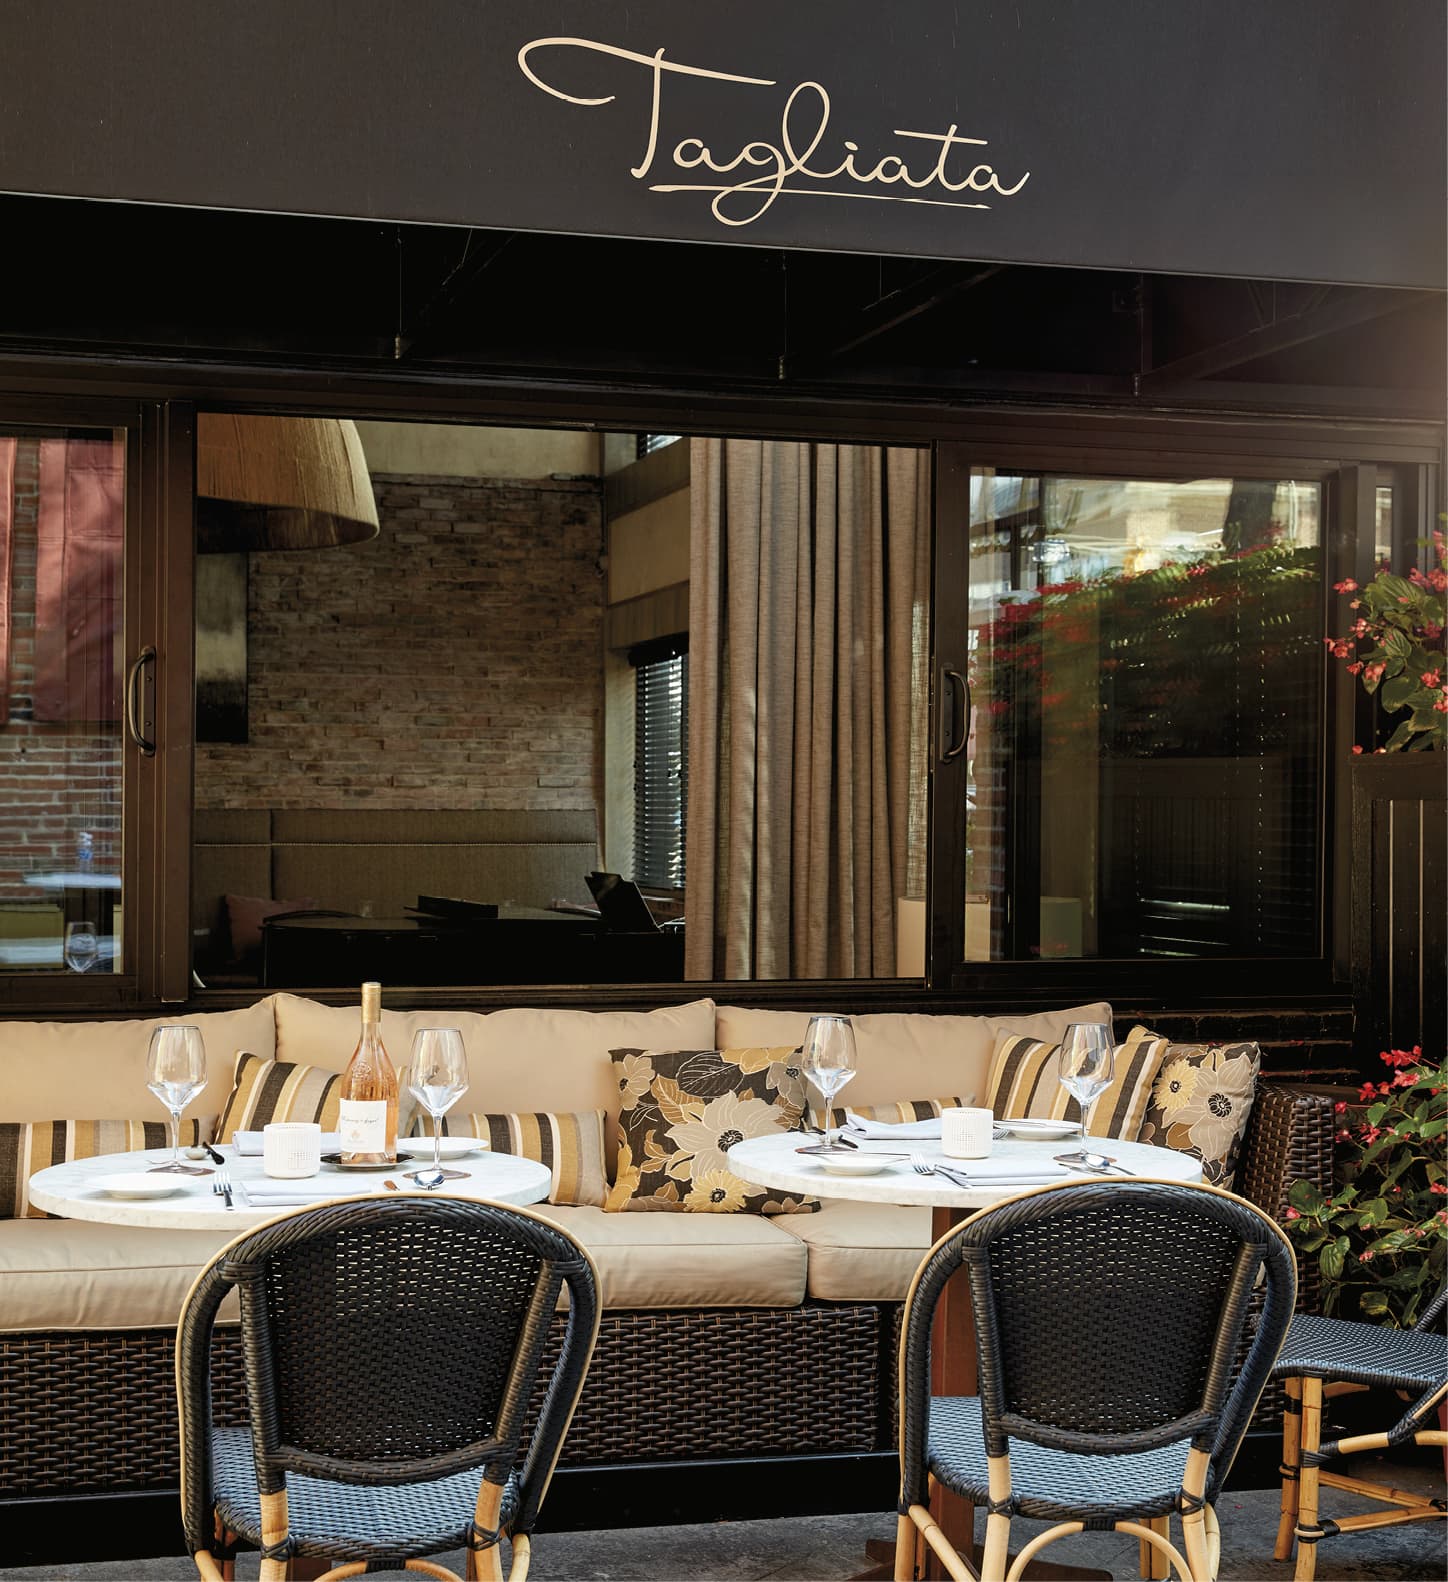 Awning of the Tagliata restaurant with tables underneath